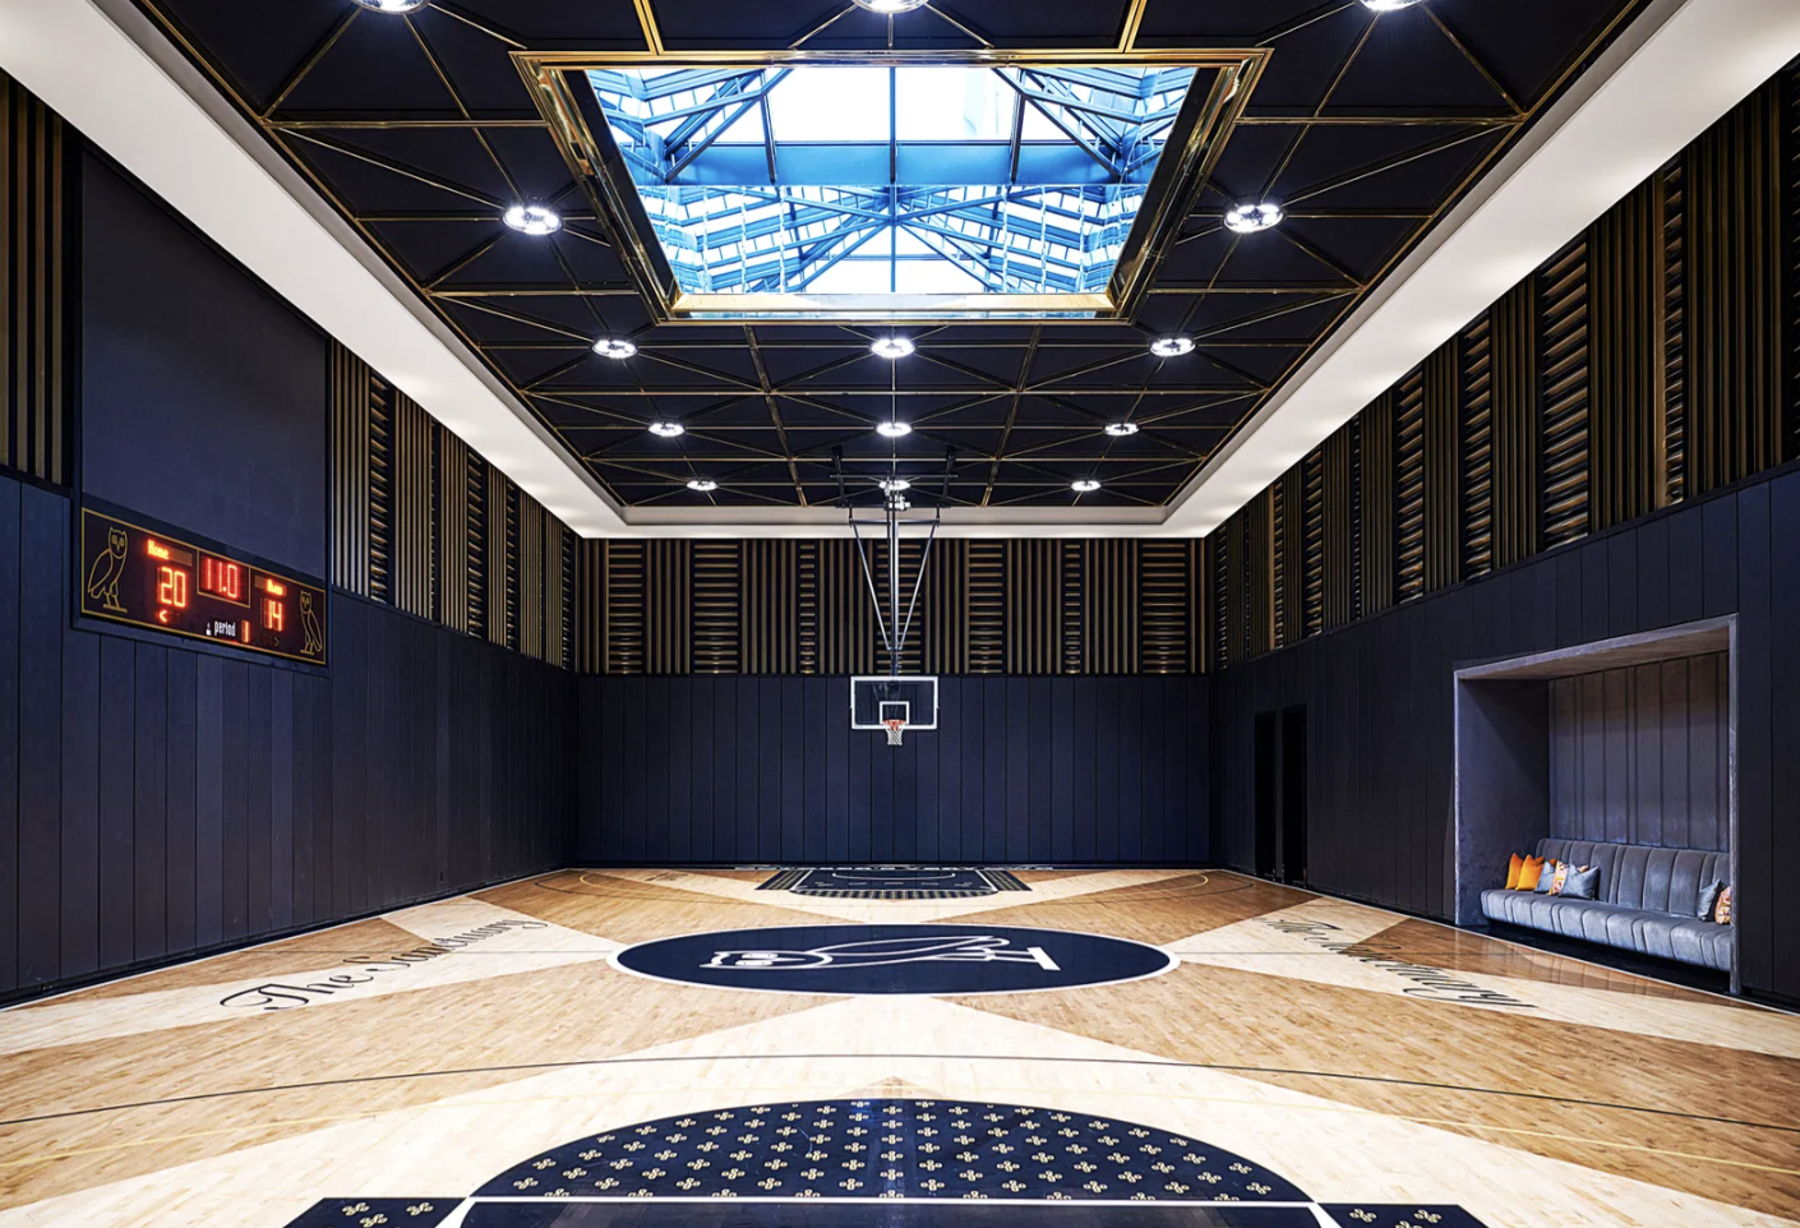 The full-size NBA court in Drake's home.